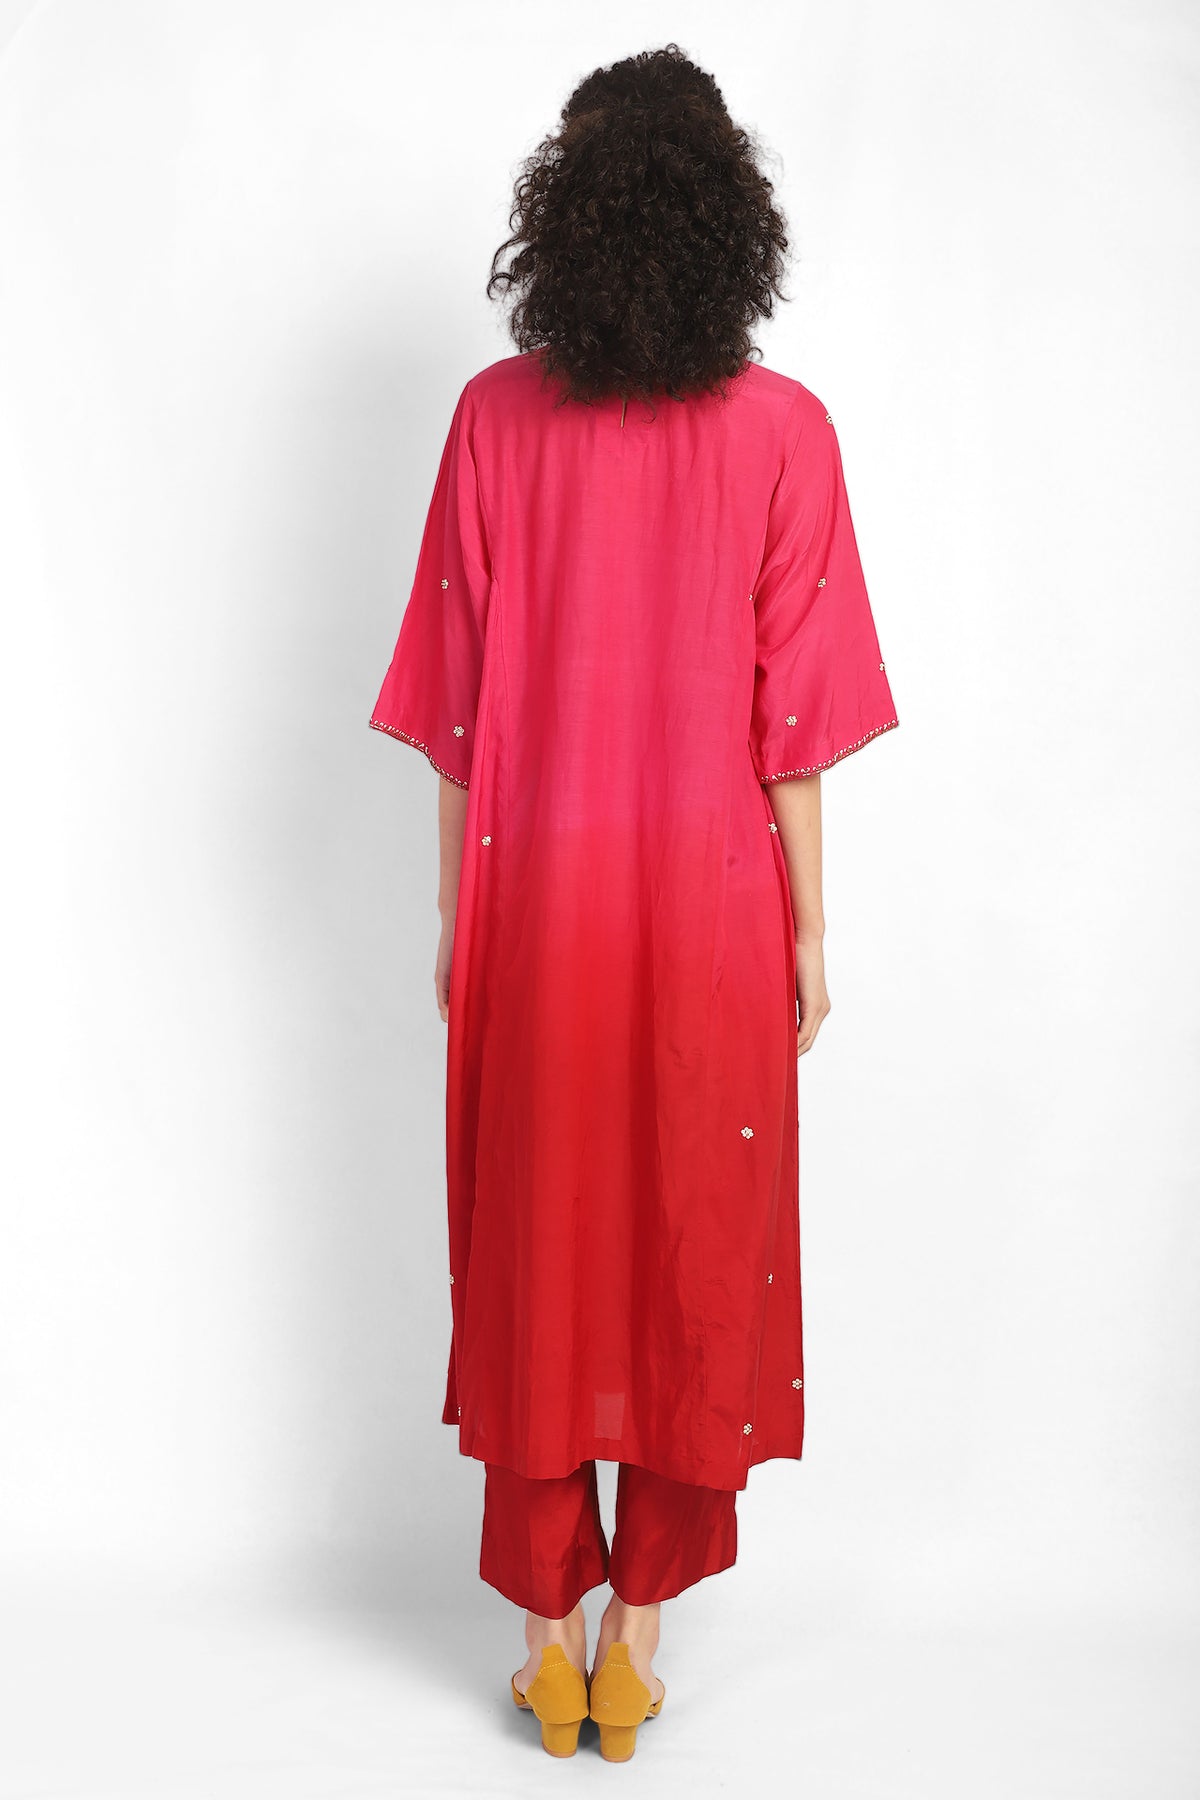 Pink And Red Ombre Hand Embroidered Jaal Work Kurta Set. Comes With Pants In The Same Colour